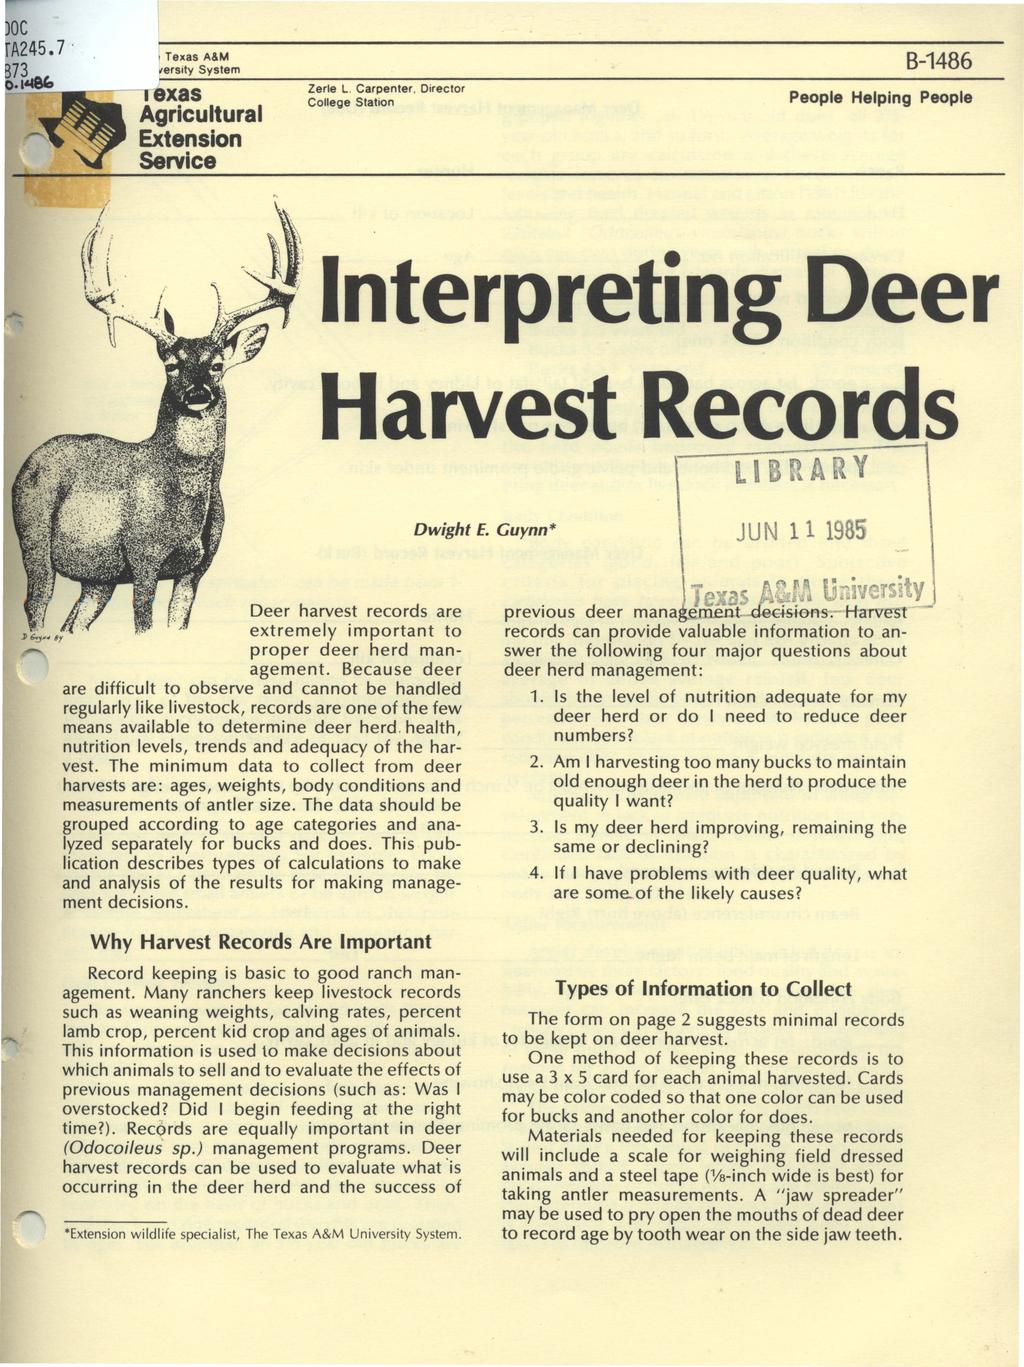 Texas B-1486 A&M versity System Agricultural Extension Service Zerle L. Carpenter. Director College Station People Helping People nterpreting Deer Harvest Records LB ARY Dwight f.